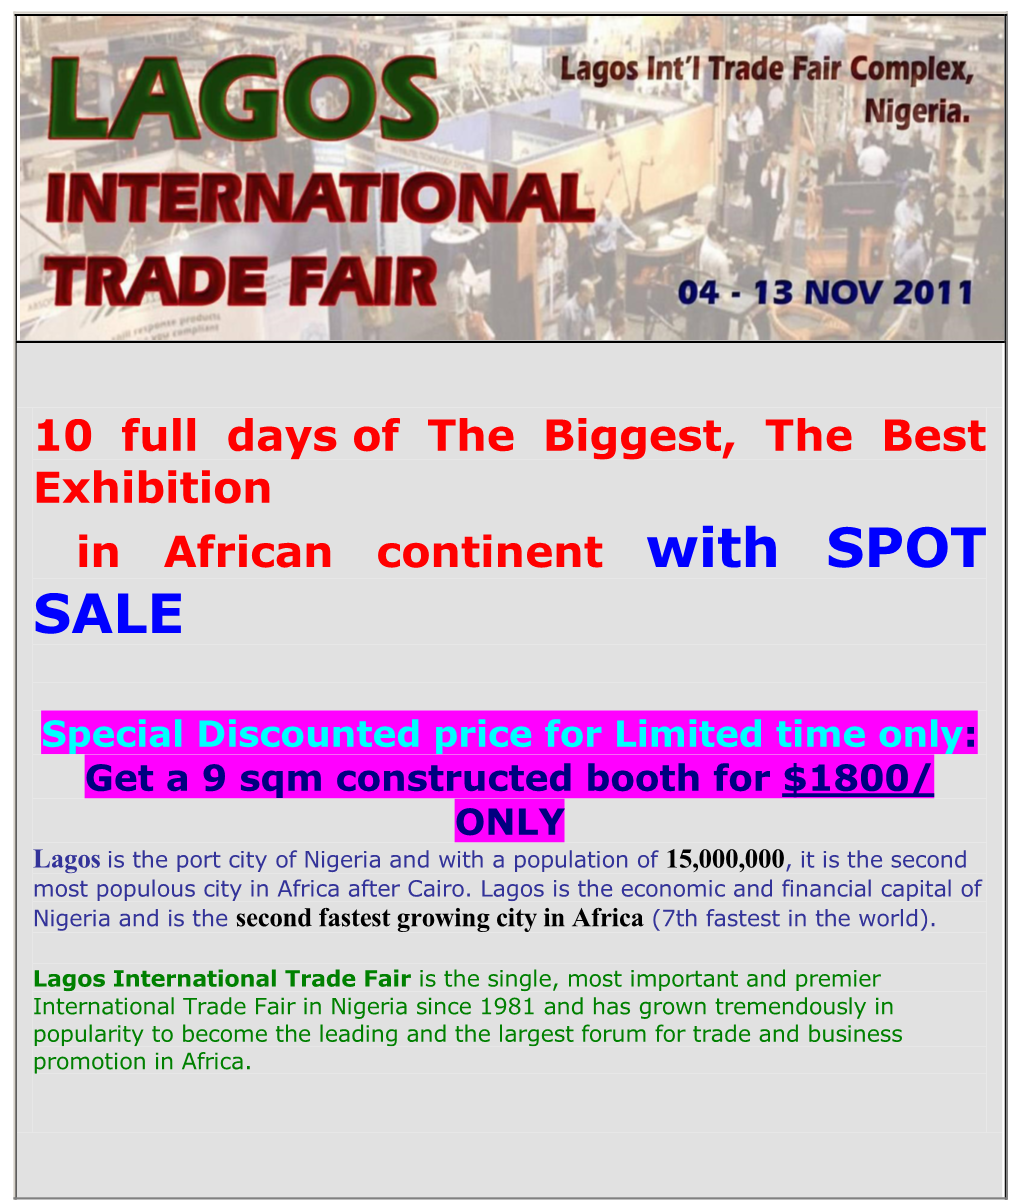 10 Full Days of the Biggest, the Best Exhibition in African Continent with SPOT